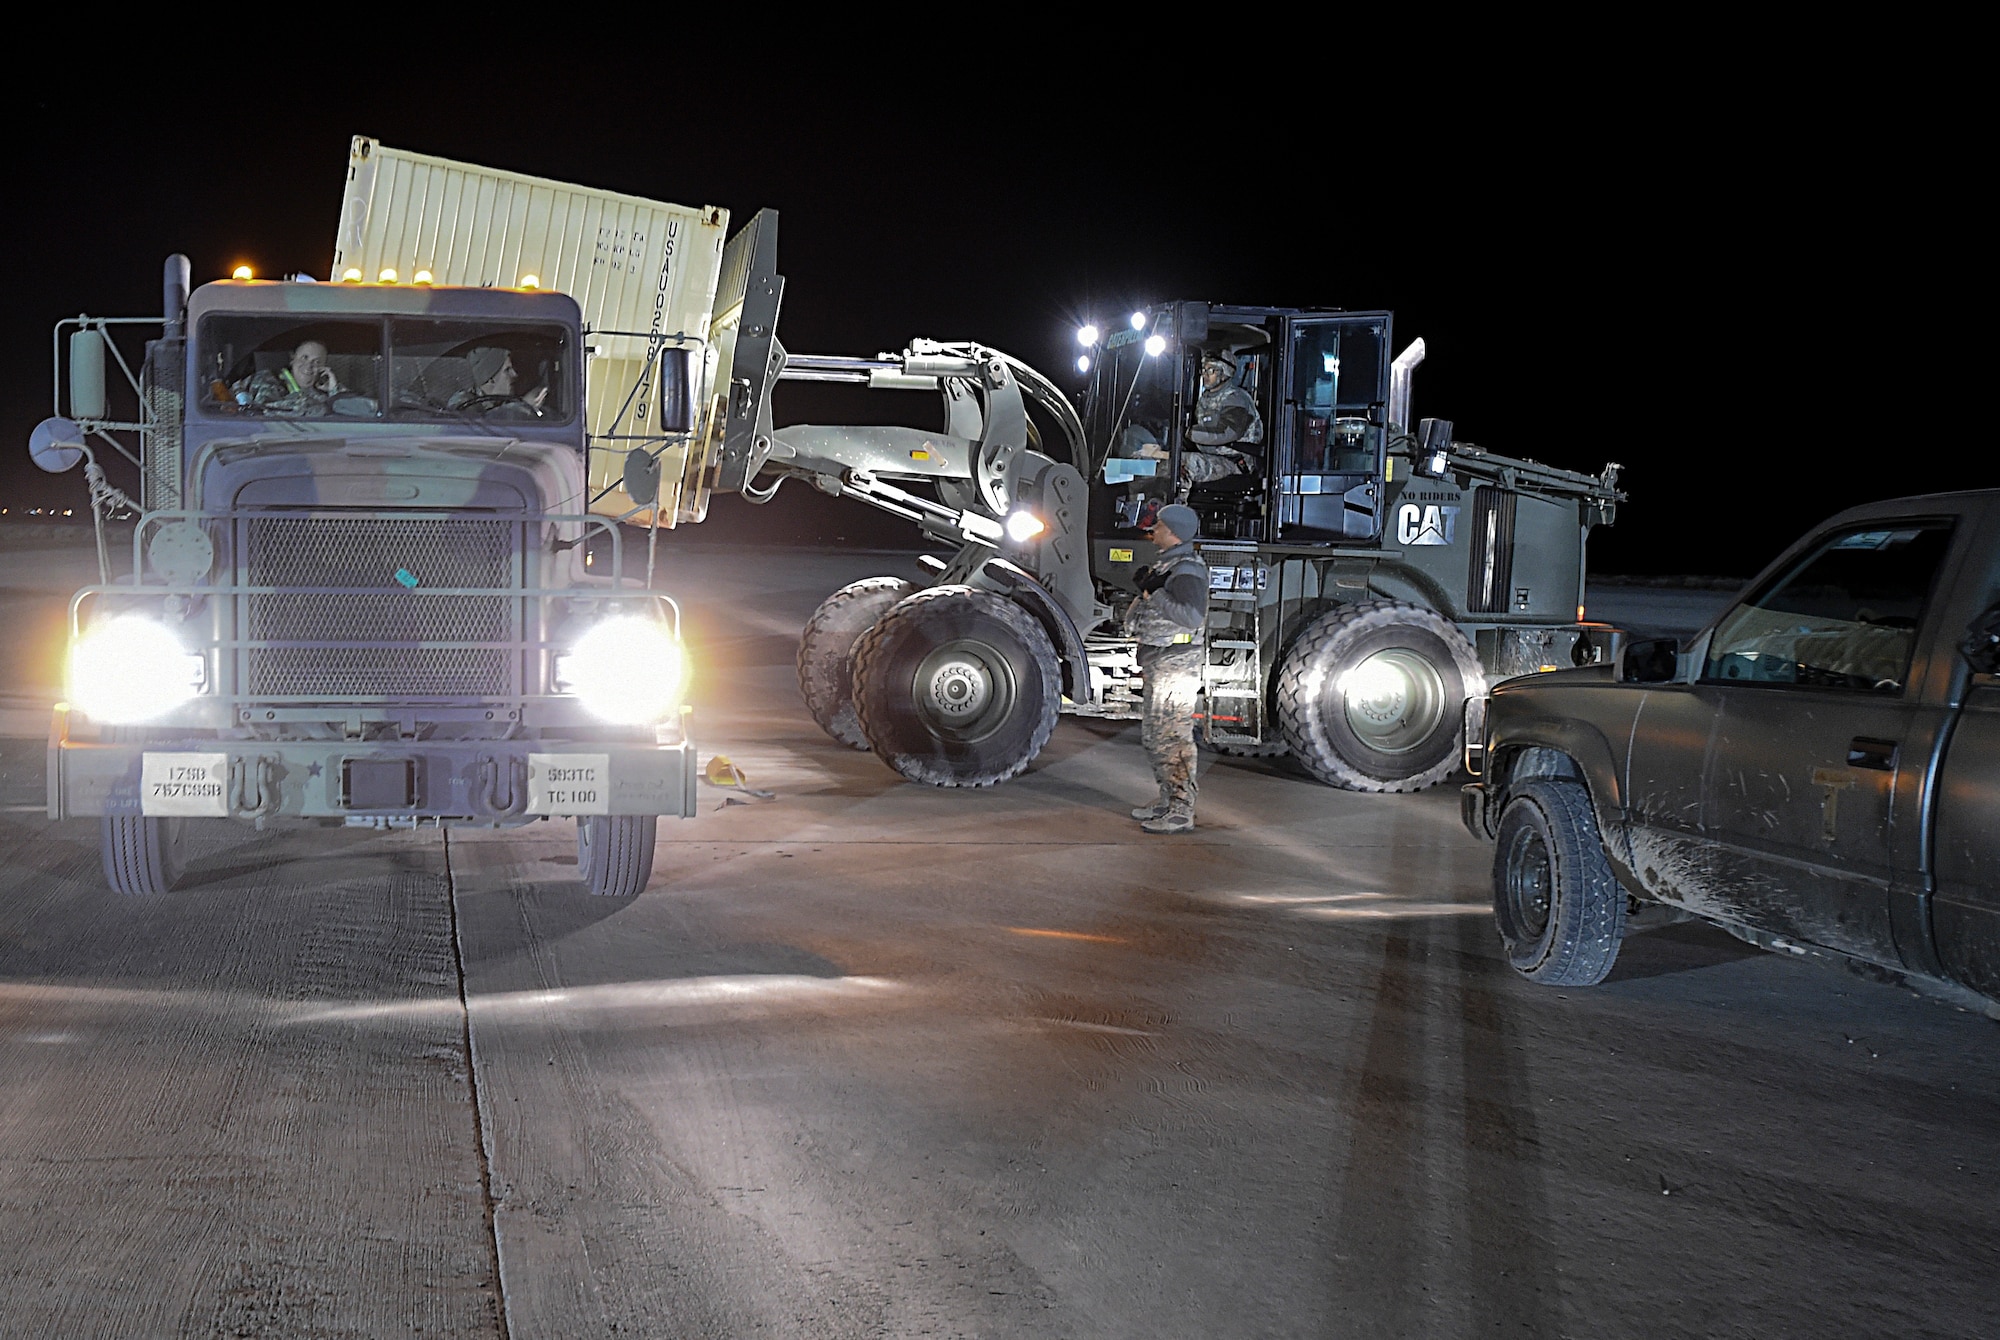 Airmen with the 821st Contingency Response Squadron Aerial Port Flight, load cargo to the back of a truck during Exercise Turbo Distribution 16-02, March 17, 2016, at Amedee Army Airfield, Calif.  The Joint Task Force Port-Opening team was deployed to demonstrate their ability to arrive at an austere airfield, receive airlifted cargo, move the cargo by truck to a forward location and stage it for distribution. (U.S. Air Force photo by Staff Sgt. Robert Hicks/Released)